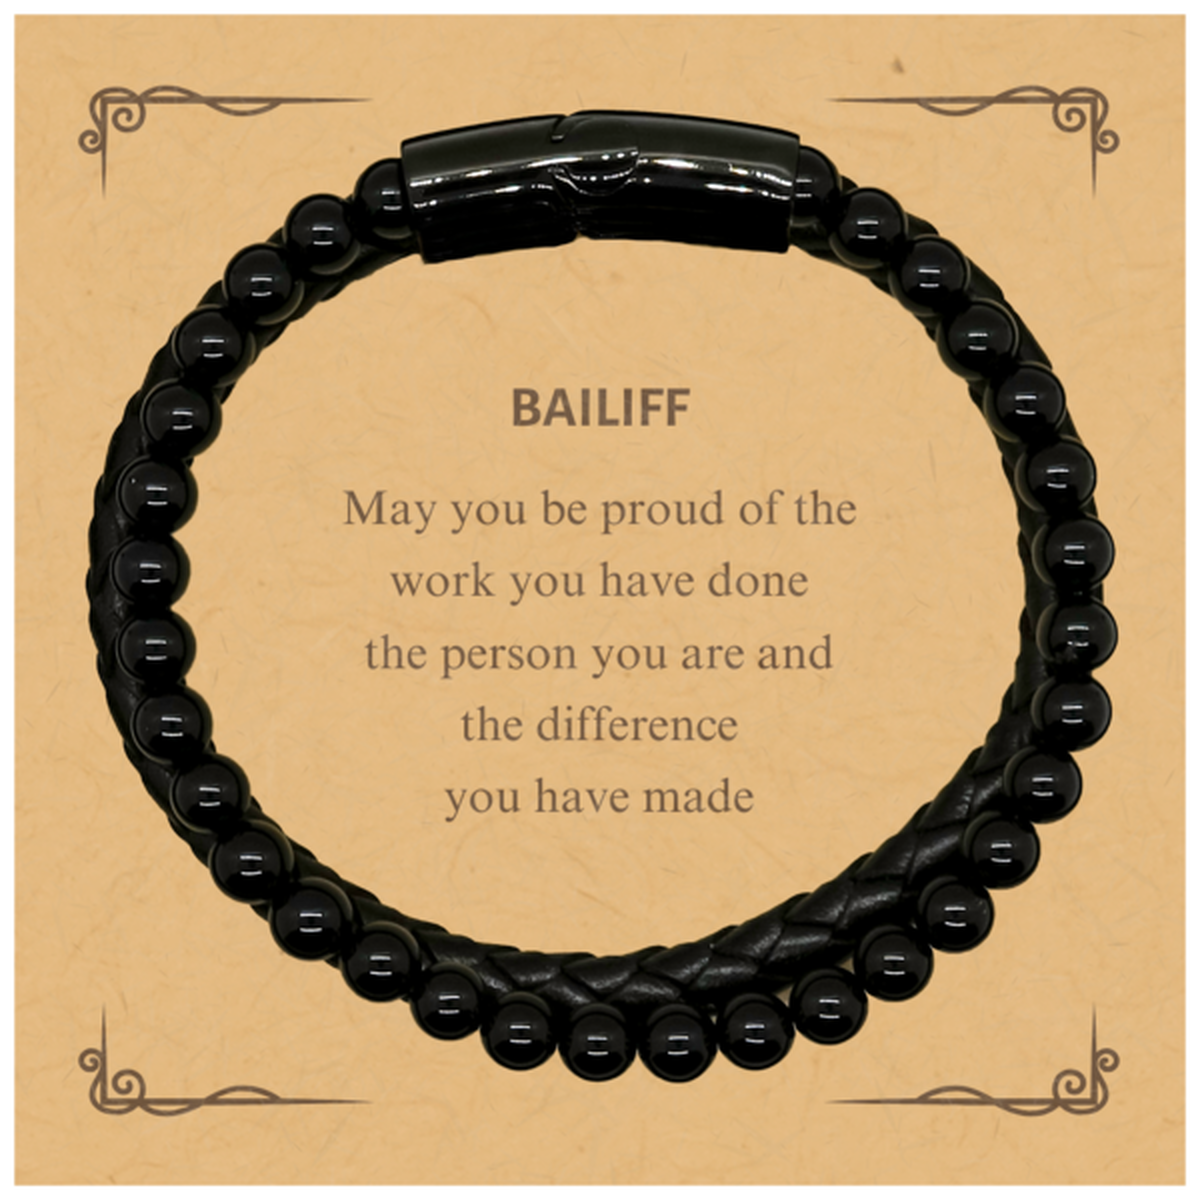 Bailiff May you be proud of the work you have done, Retirement Bailiff Stone Leather Bracelets for Colleague Appreciation Gifts Amazing for Bailiff